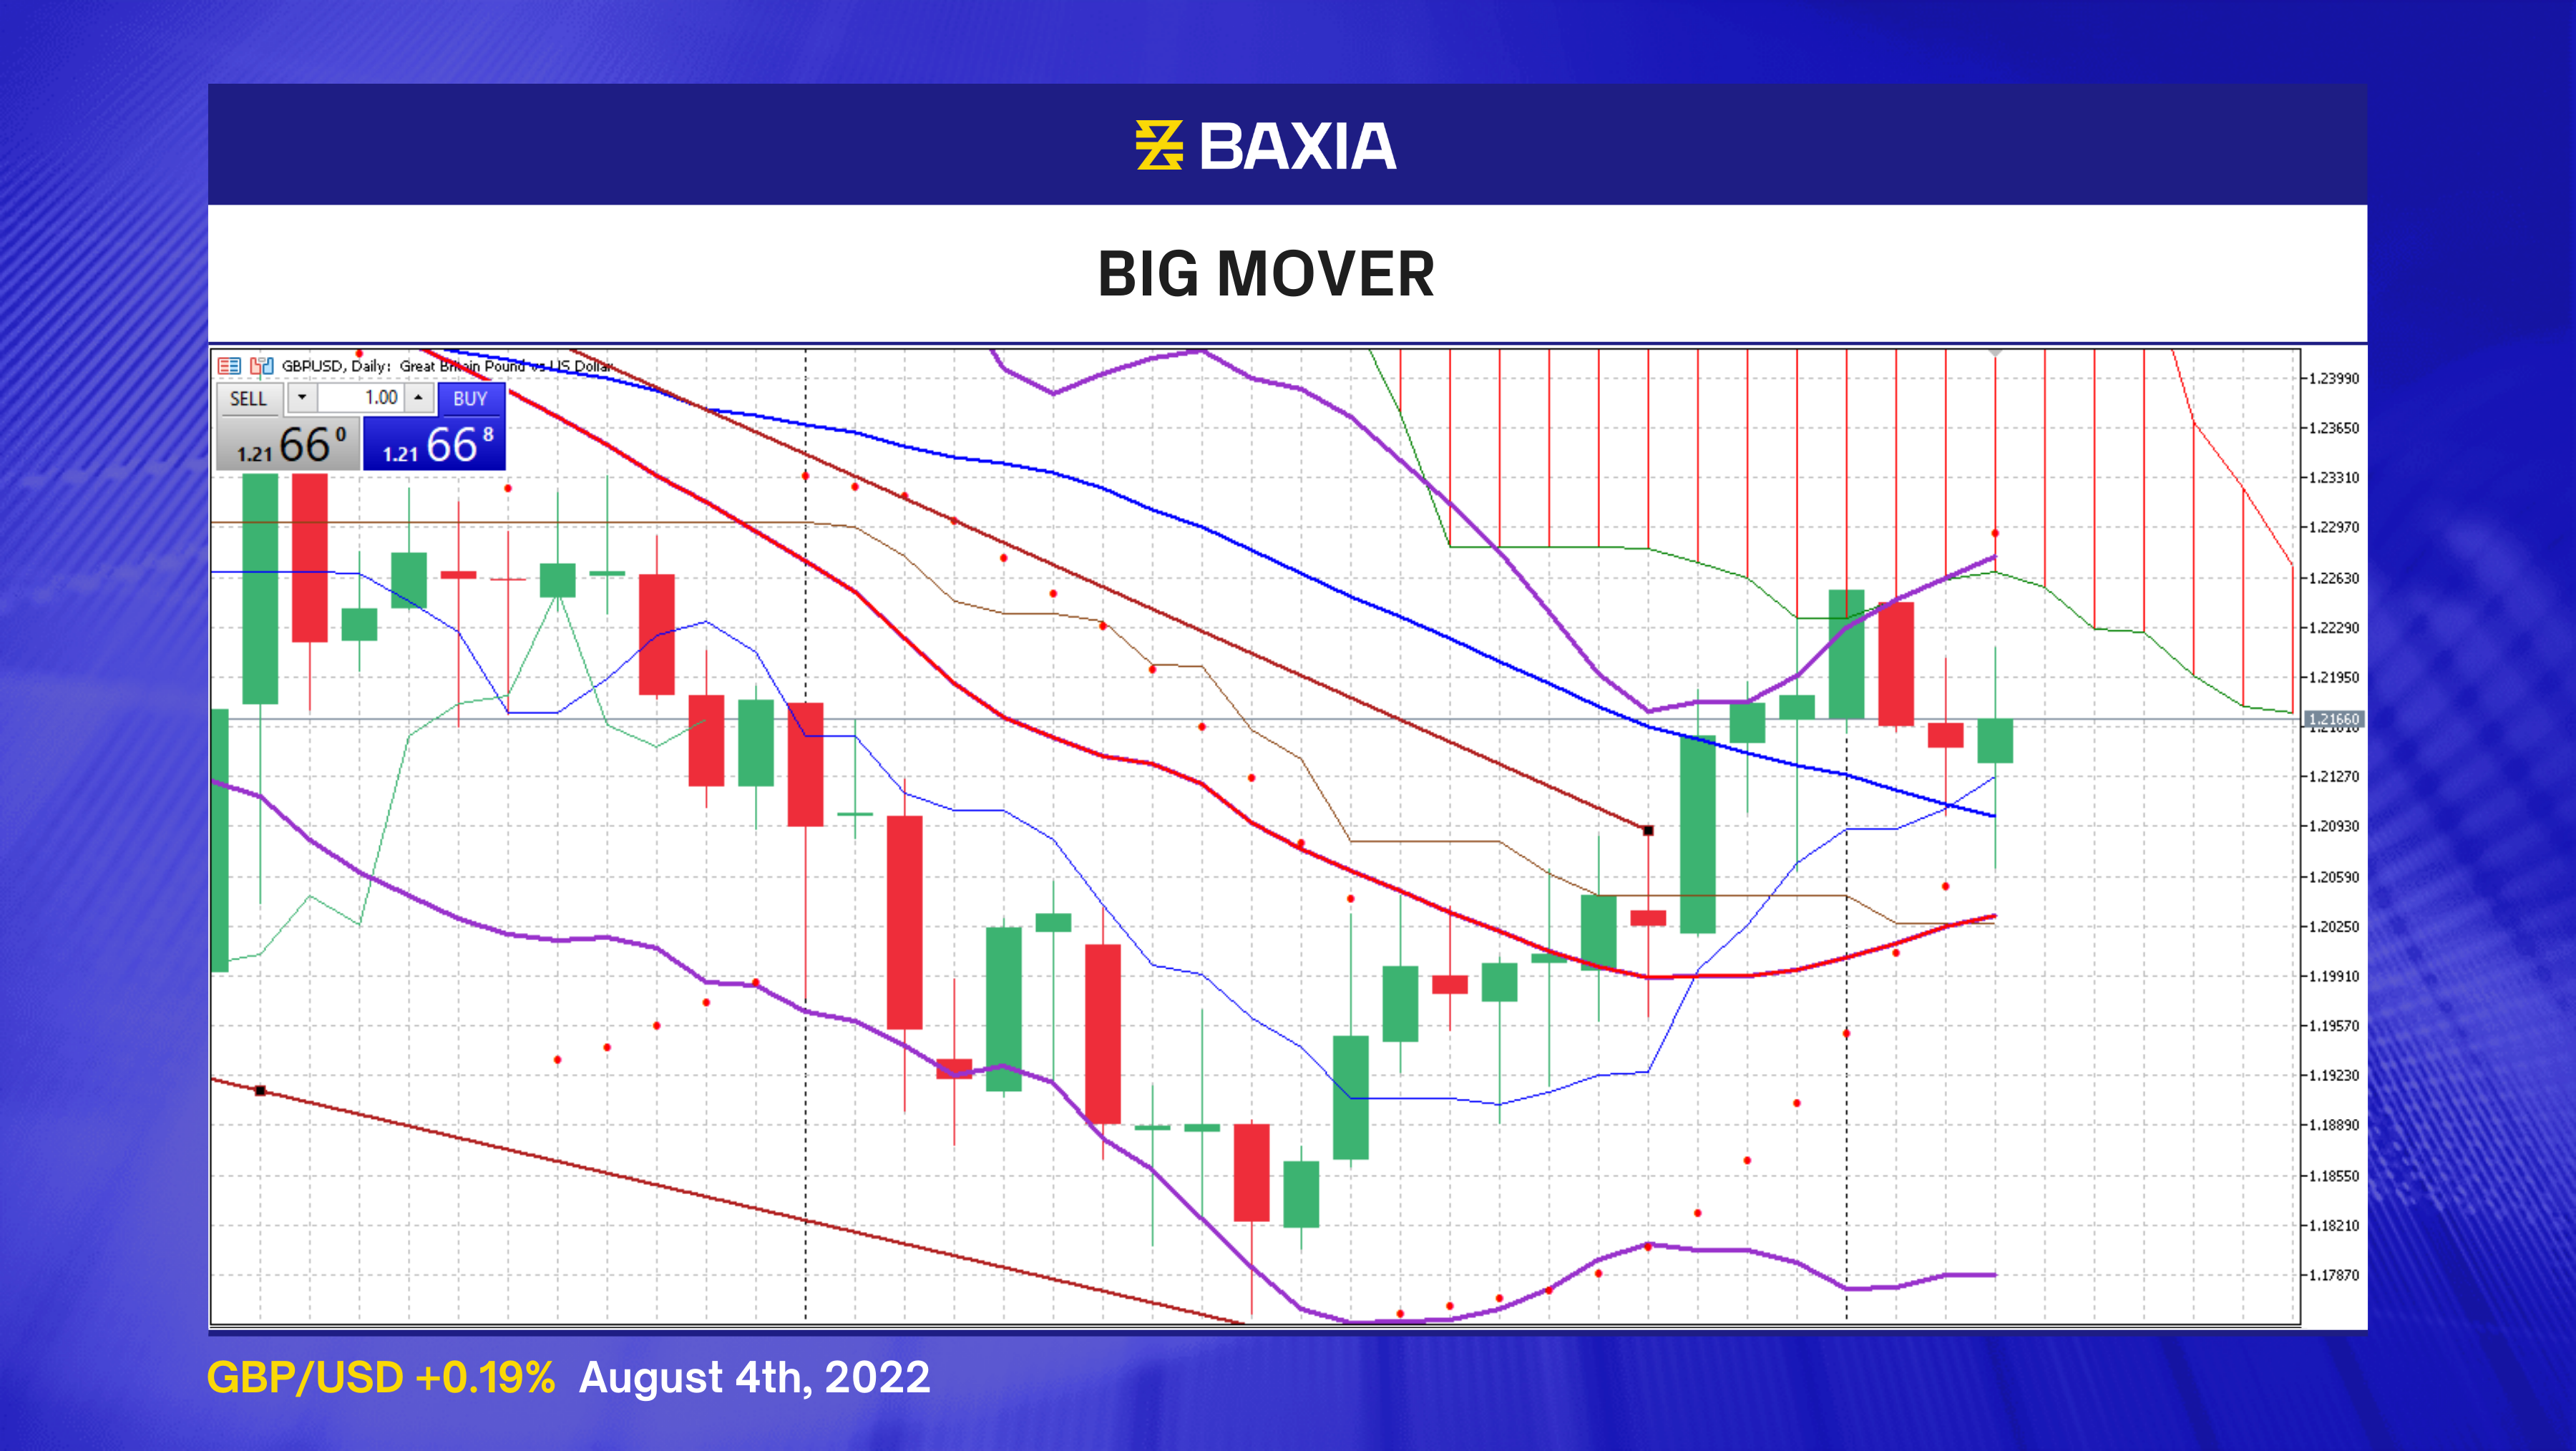 TW_Big Mover - Blue GBPUSD Aug 4th 2022